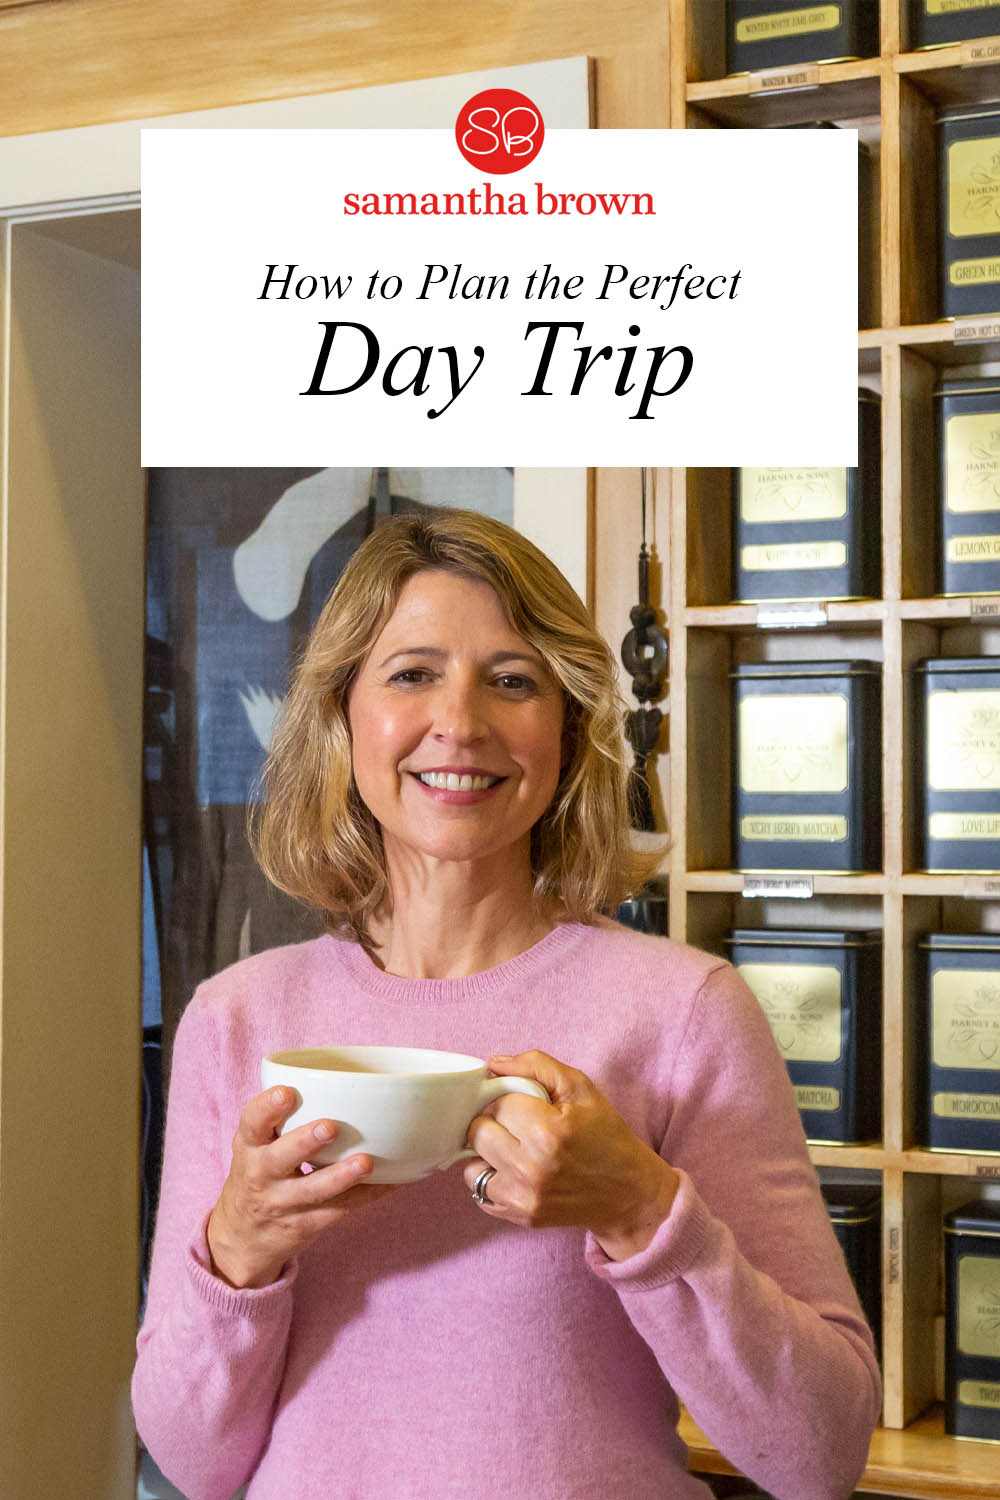 How to Plan a Day Trip